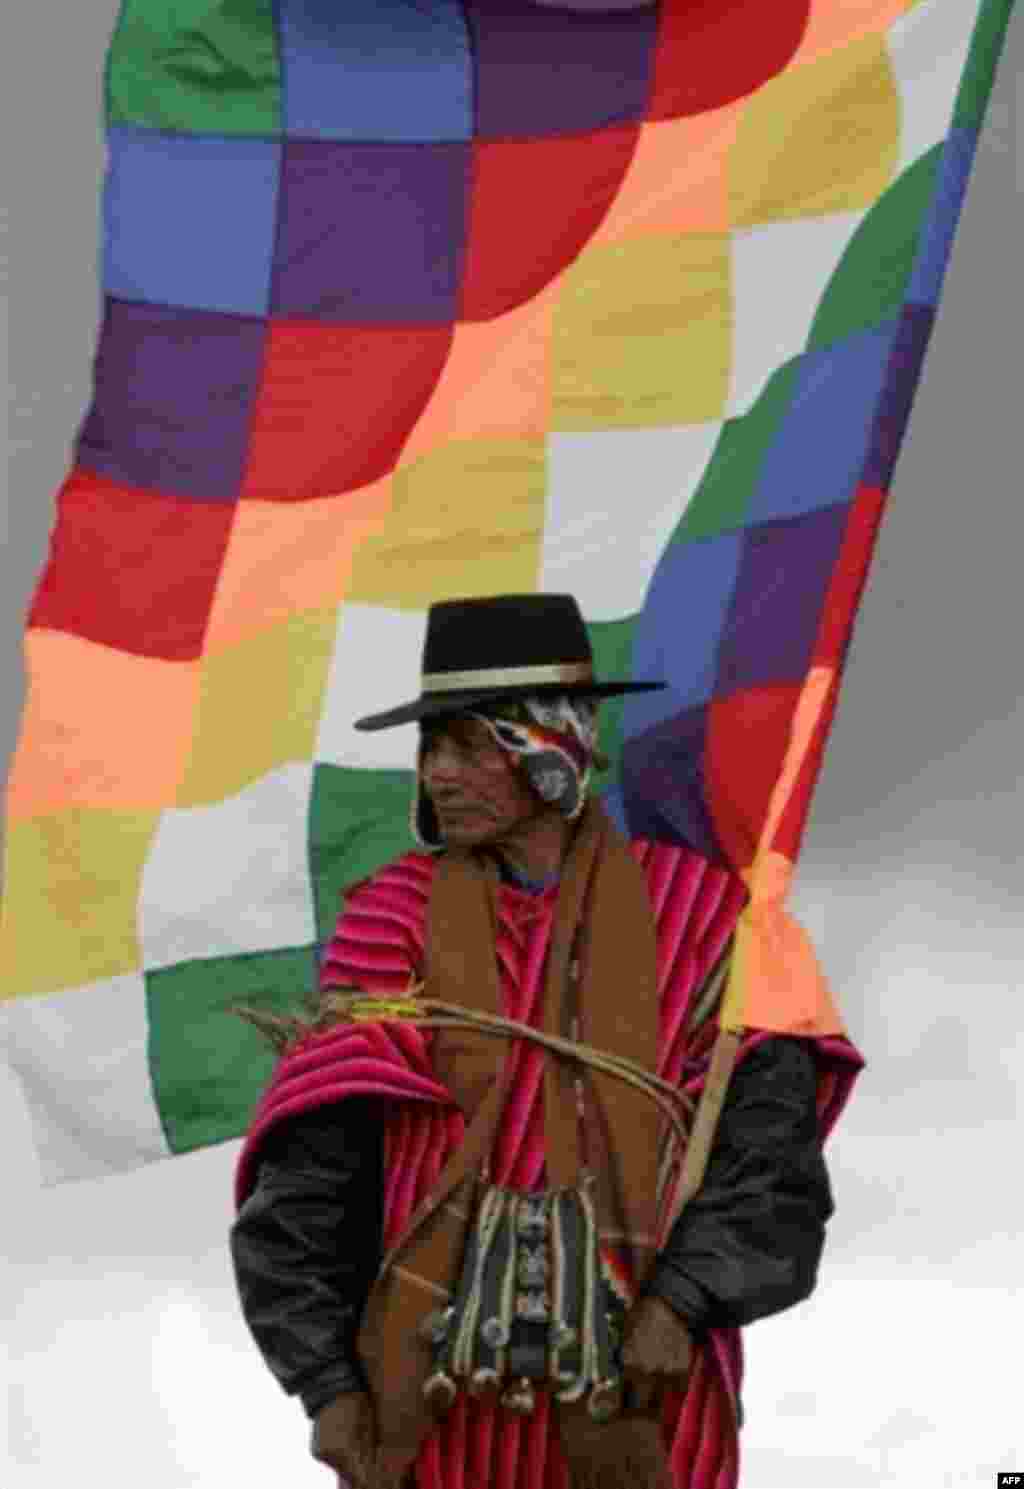 A native Bolivian holds a flag symbolizing the old Inca empire at an Indian ceremony to induct Evo Morales as Bolivia's president in January (AFP) - A tidal wave of elections -- 12 in 13 months -- moved Latin American politics leftward and placed a series of colorful, unusual, controversial, and sometimes familiar faces in presidential palaces. While some -- chiefly Venezuela's Hugo Chavez -- struck an anti-U.S. note, increased social spending and deeper regional integration were more important issues for most.